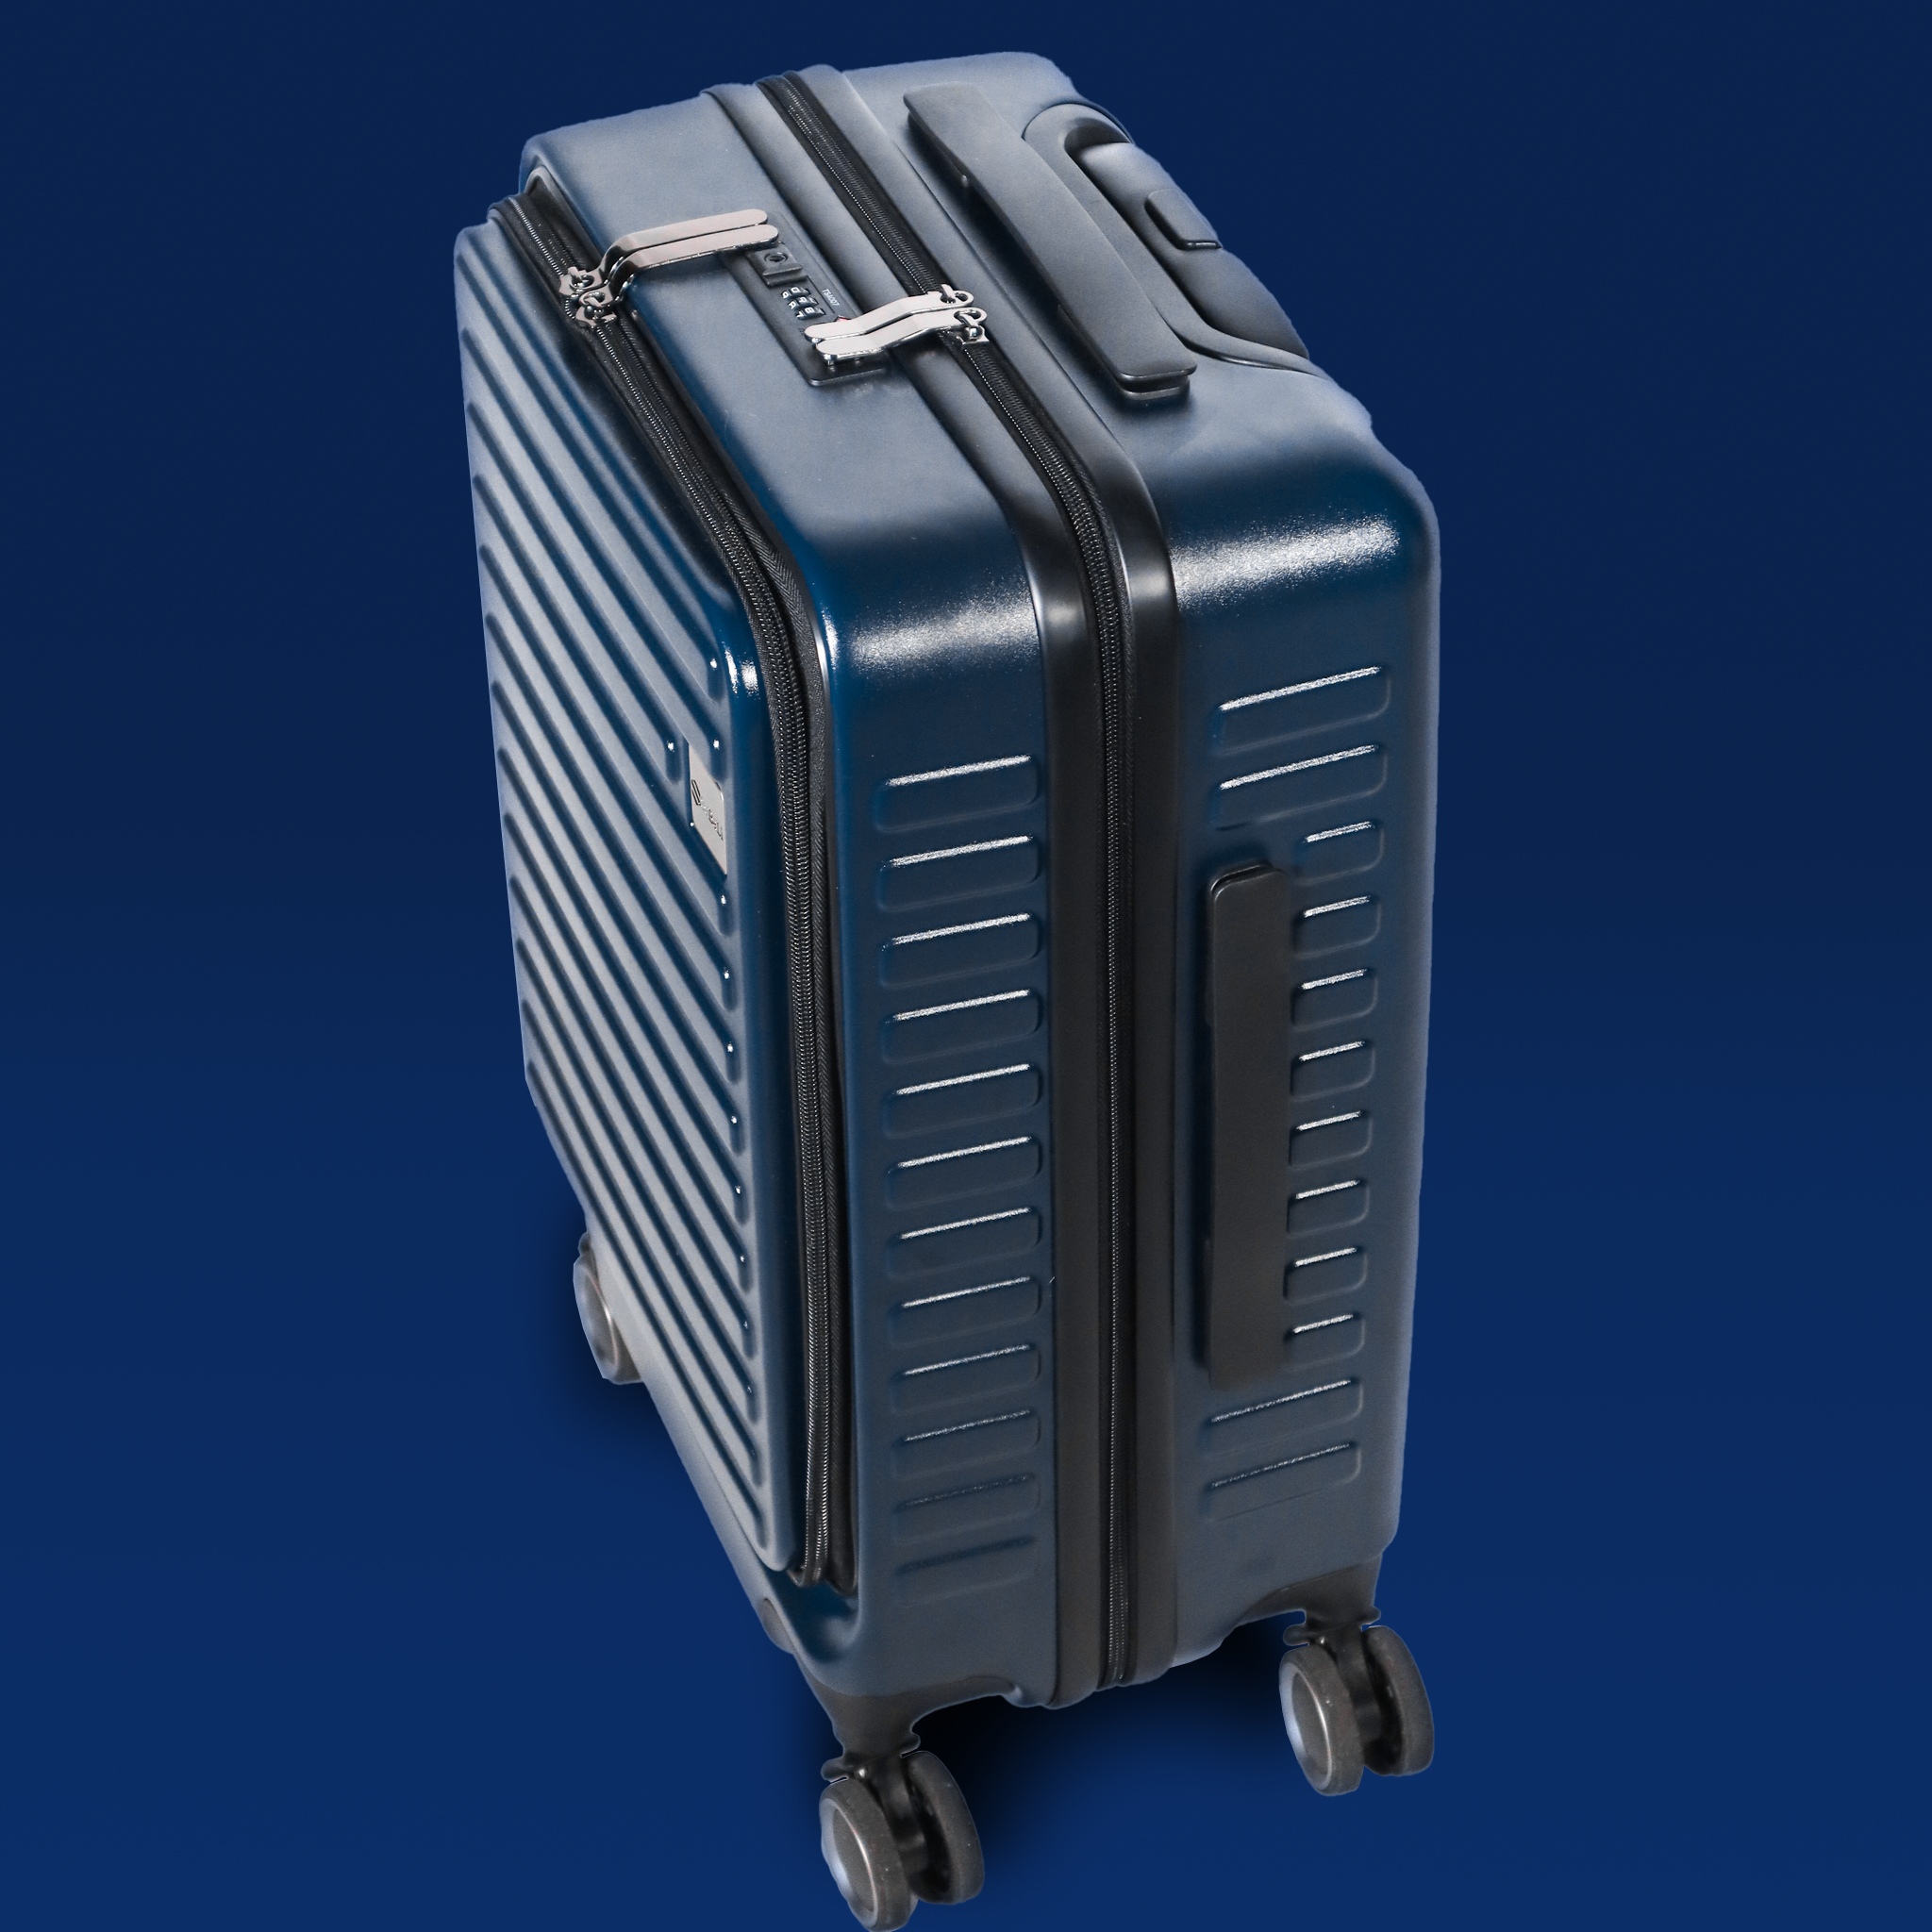 Side view of SaBaLi carry-on luggage